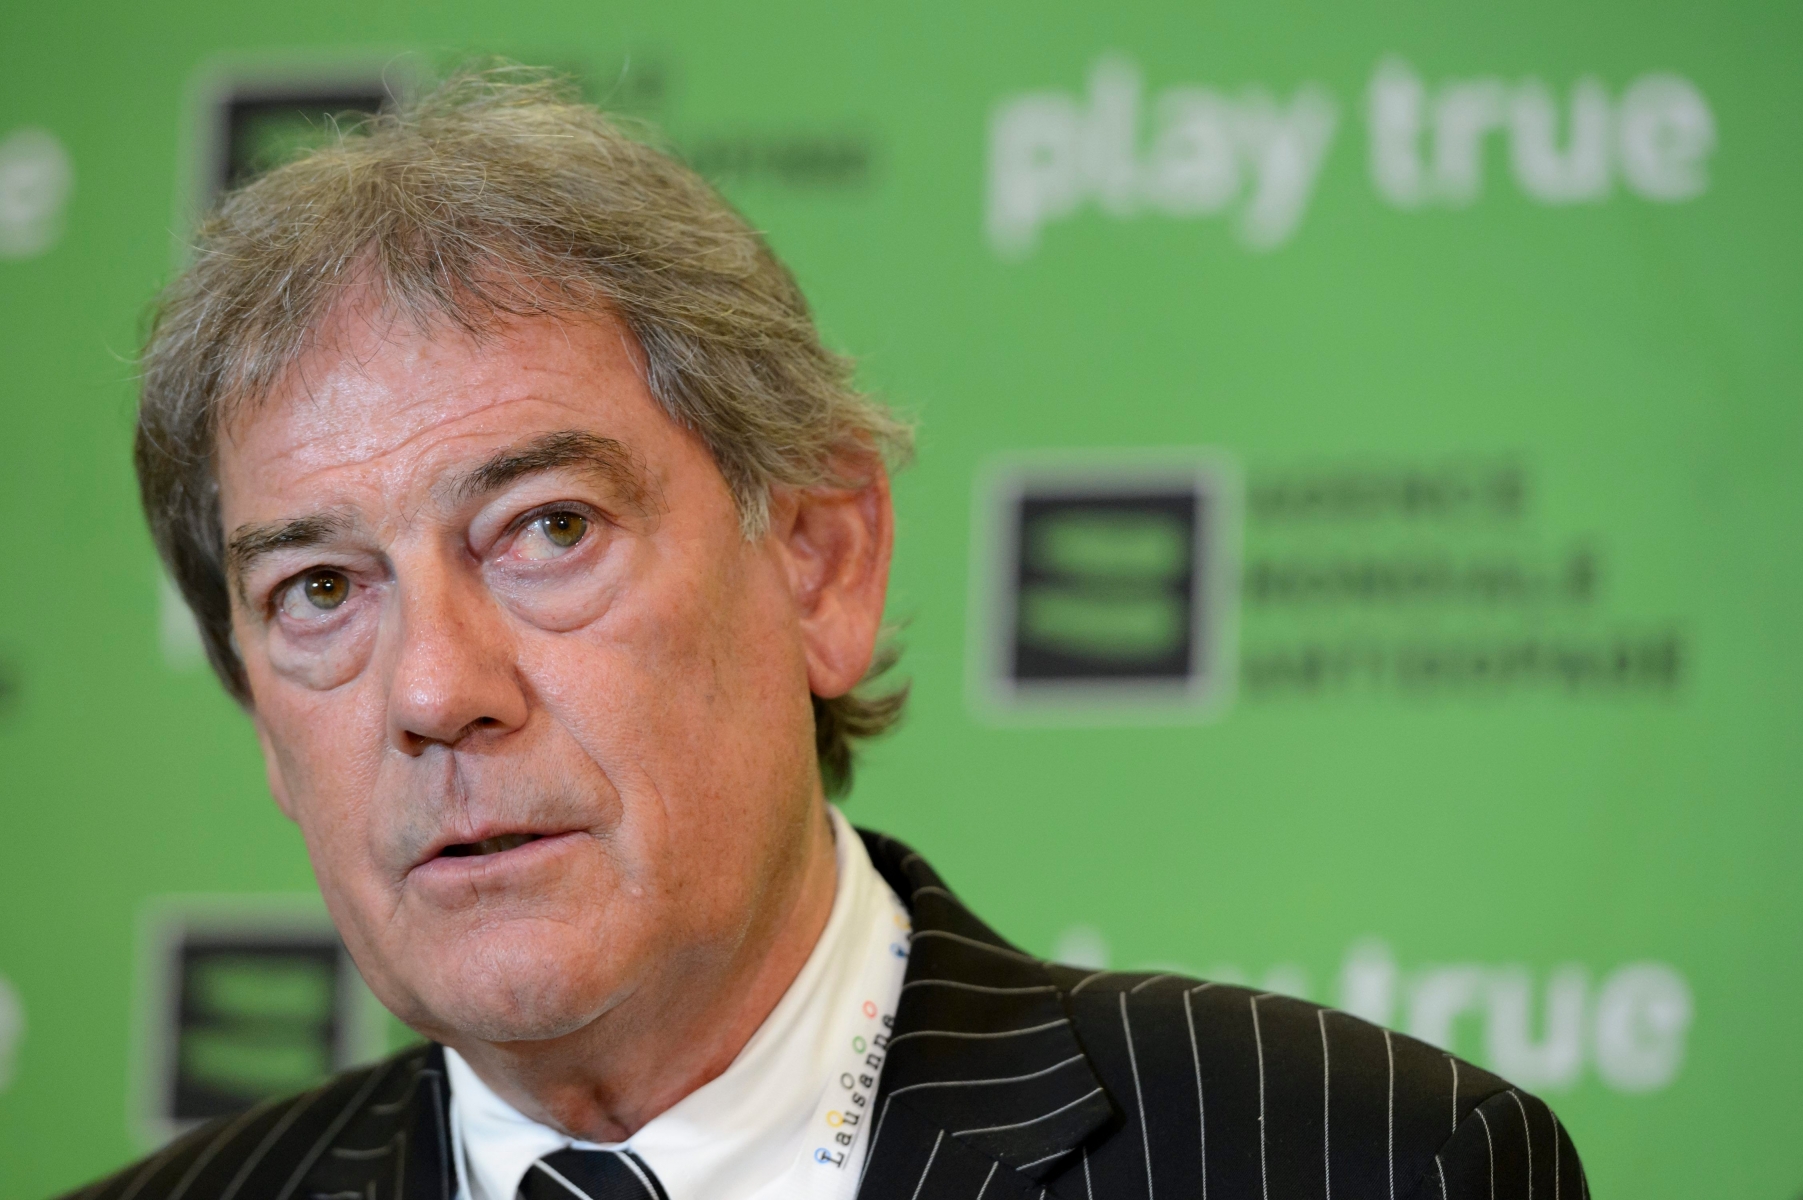 David Howman, from New Zealand, Director General of the WADA speaks during a press conference during the WADA Symposium for Anti-Doping Organizations (ADOs), in Lausanne, Switzerland, Monday, March 14, 2016. (KEYSTONE/Laurent Gillieron) SWITZERLAND WADA ANTI-DOPING SYMPOSIUM